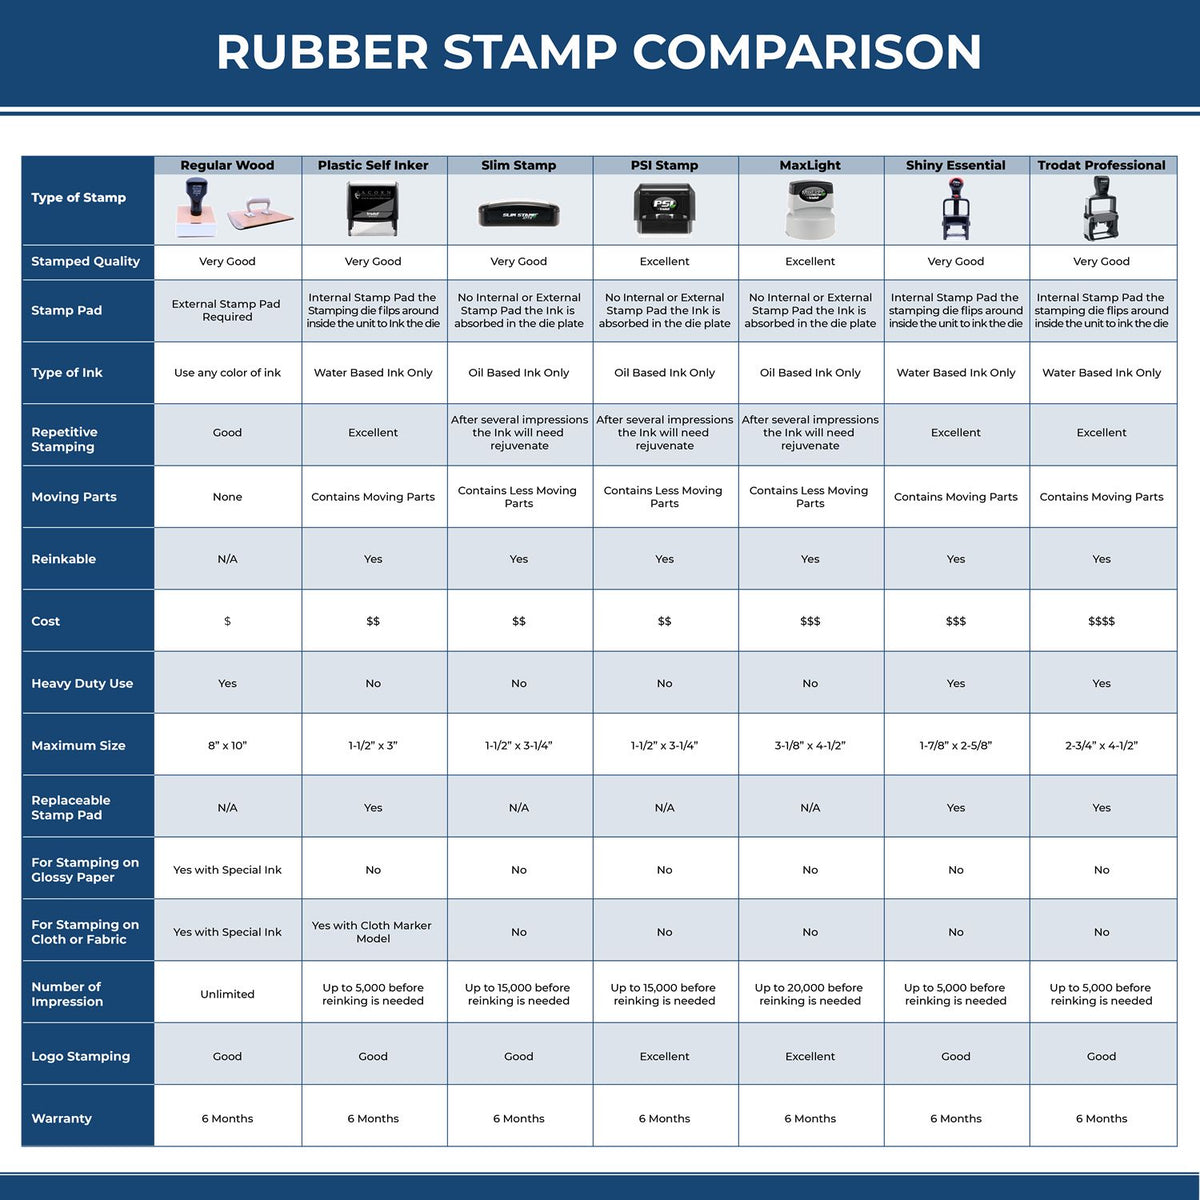 A comparison chart for the different types of mount models available for the Wooden Handle Oregon Rectangular Notary Public Stamp.